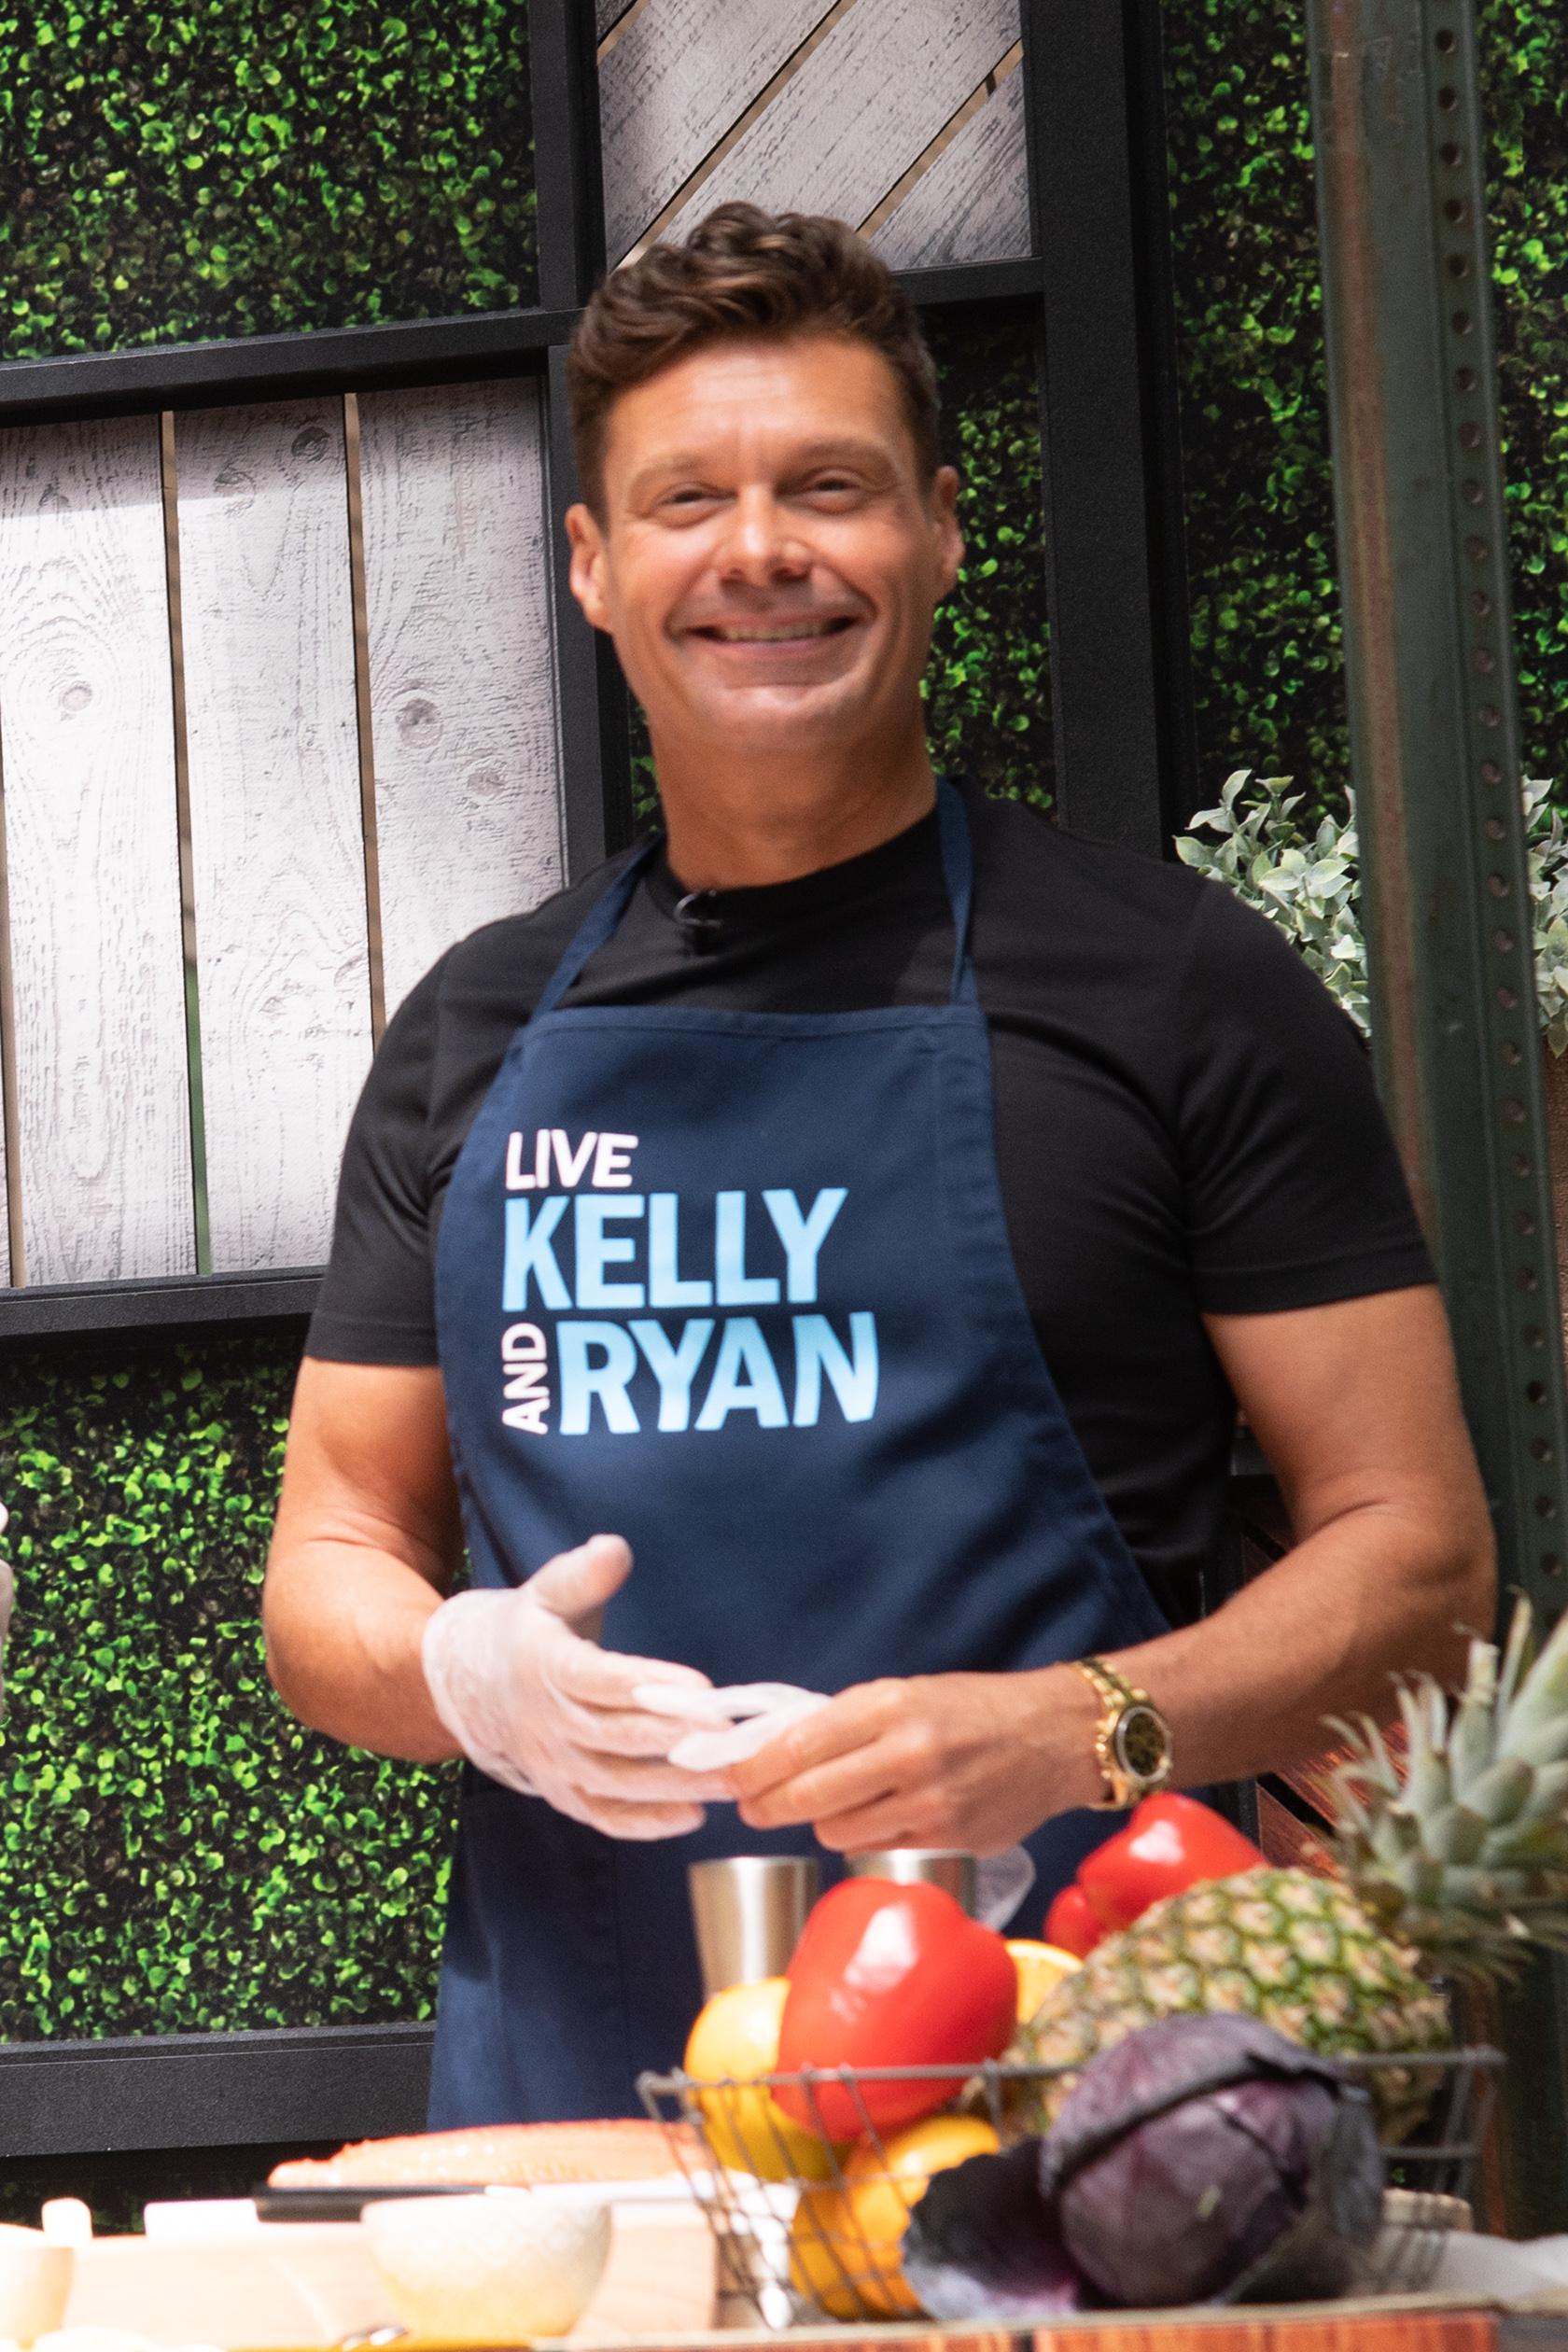 Kelly and Ryan Grilling Segment in NYC